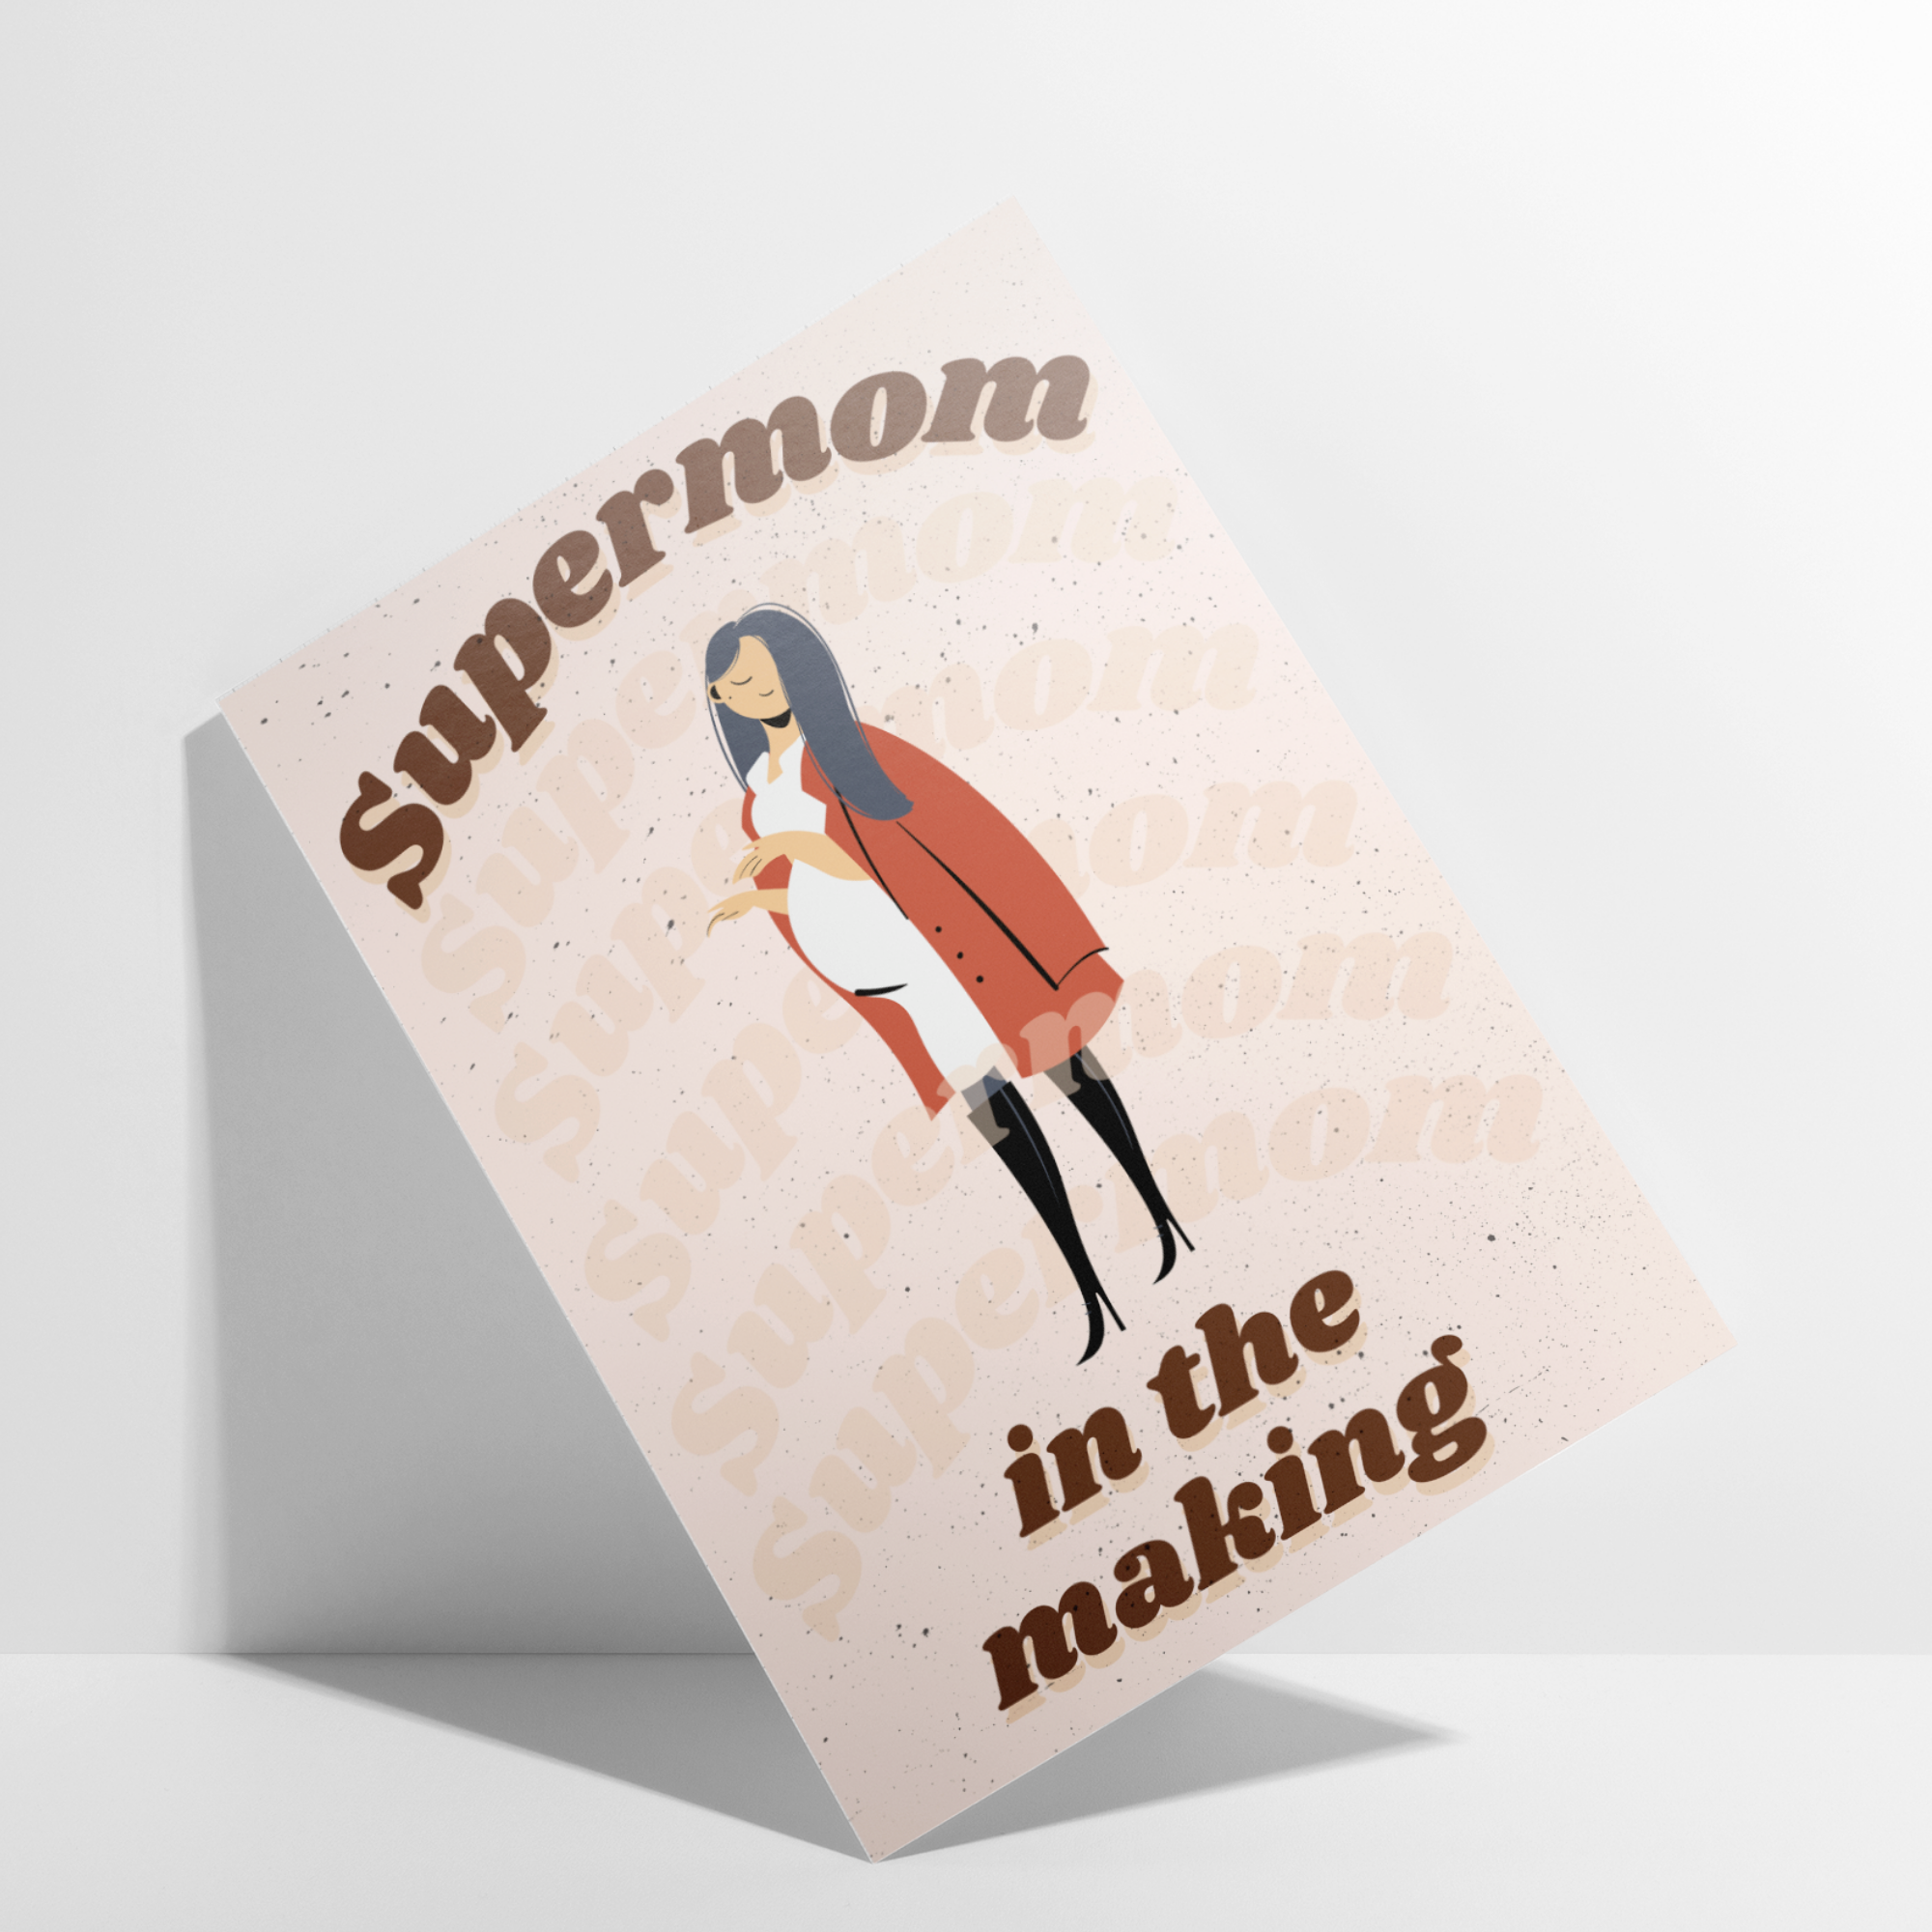 Supermom in the making  V3 Greeting card